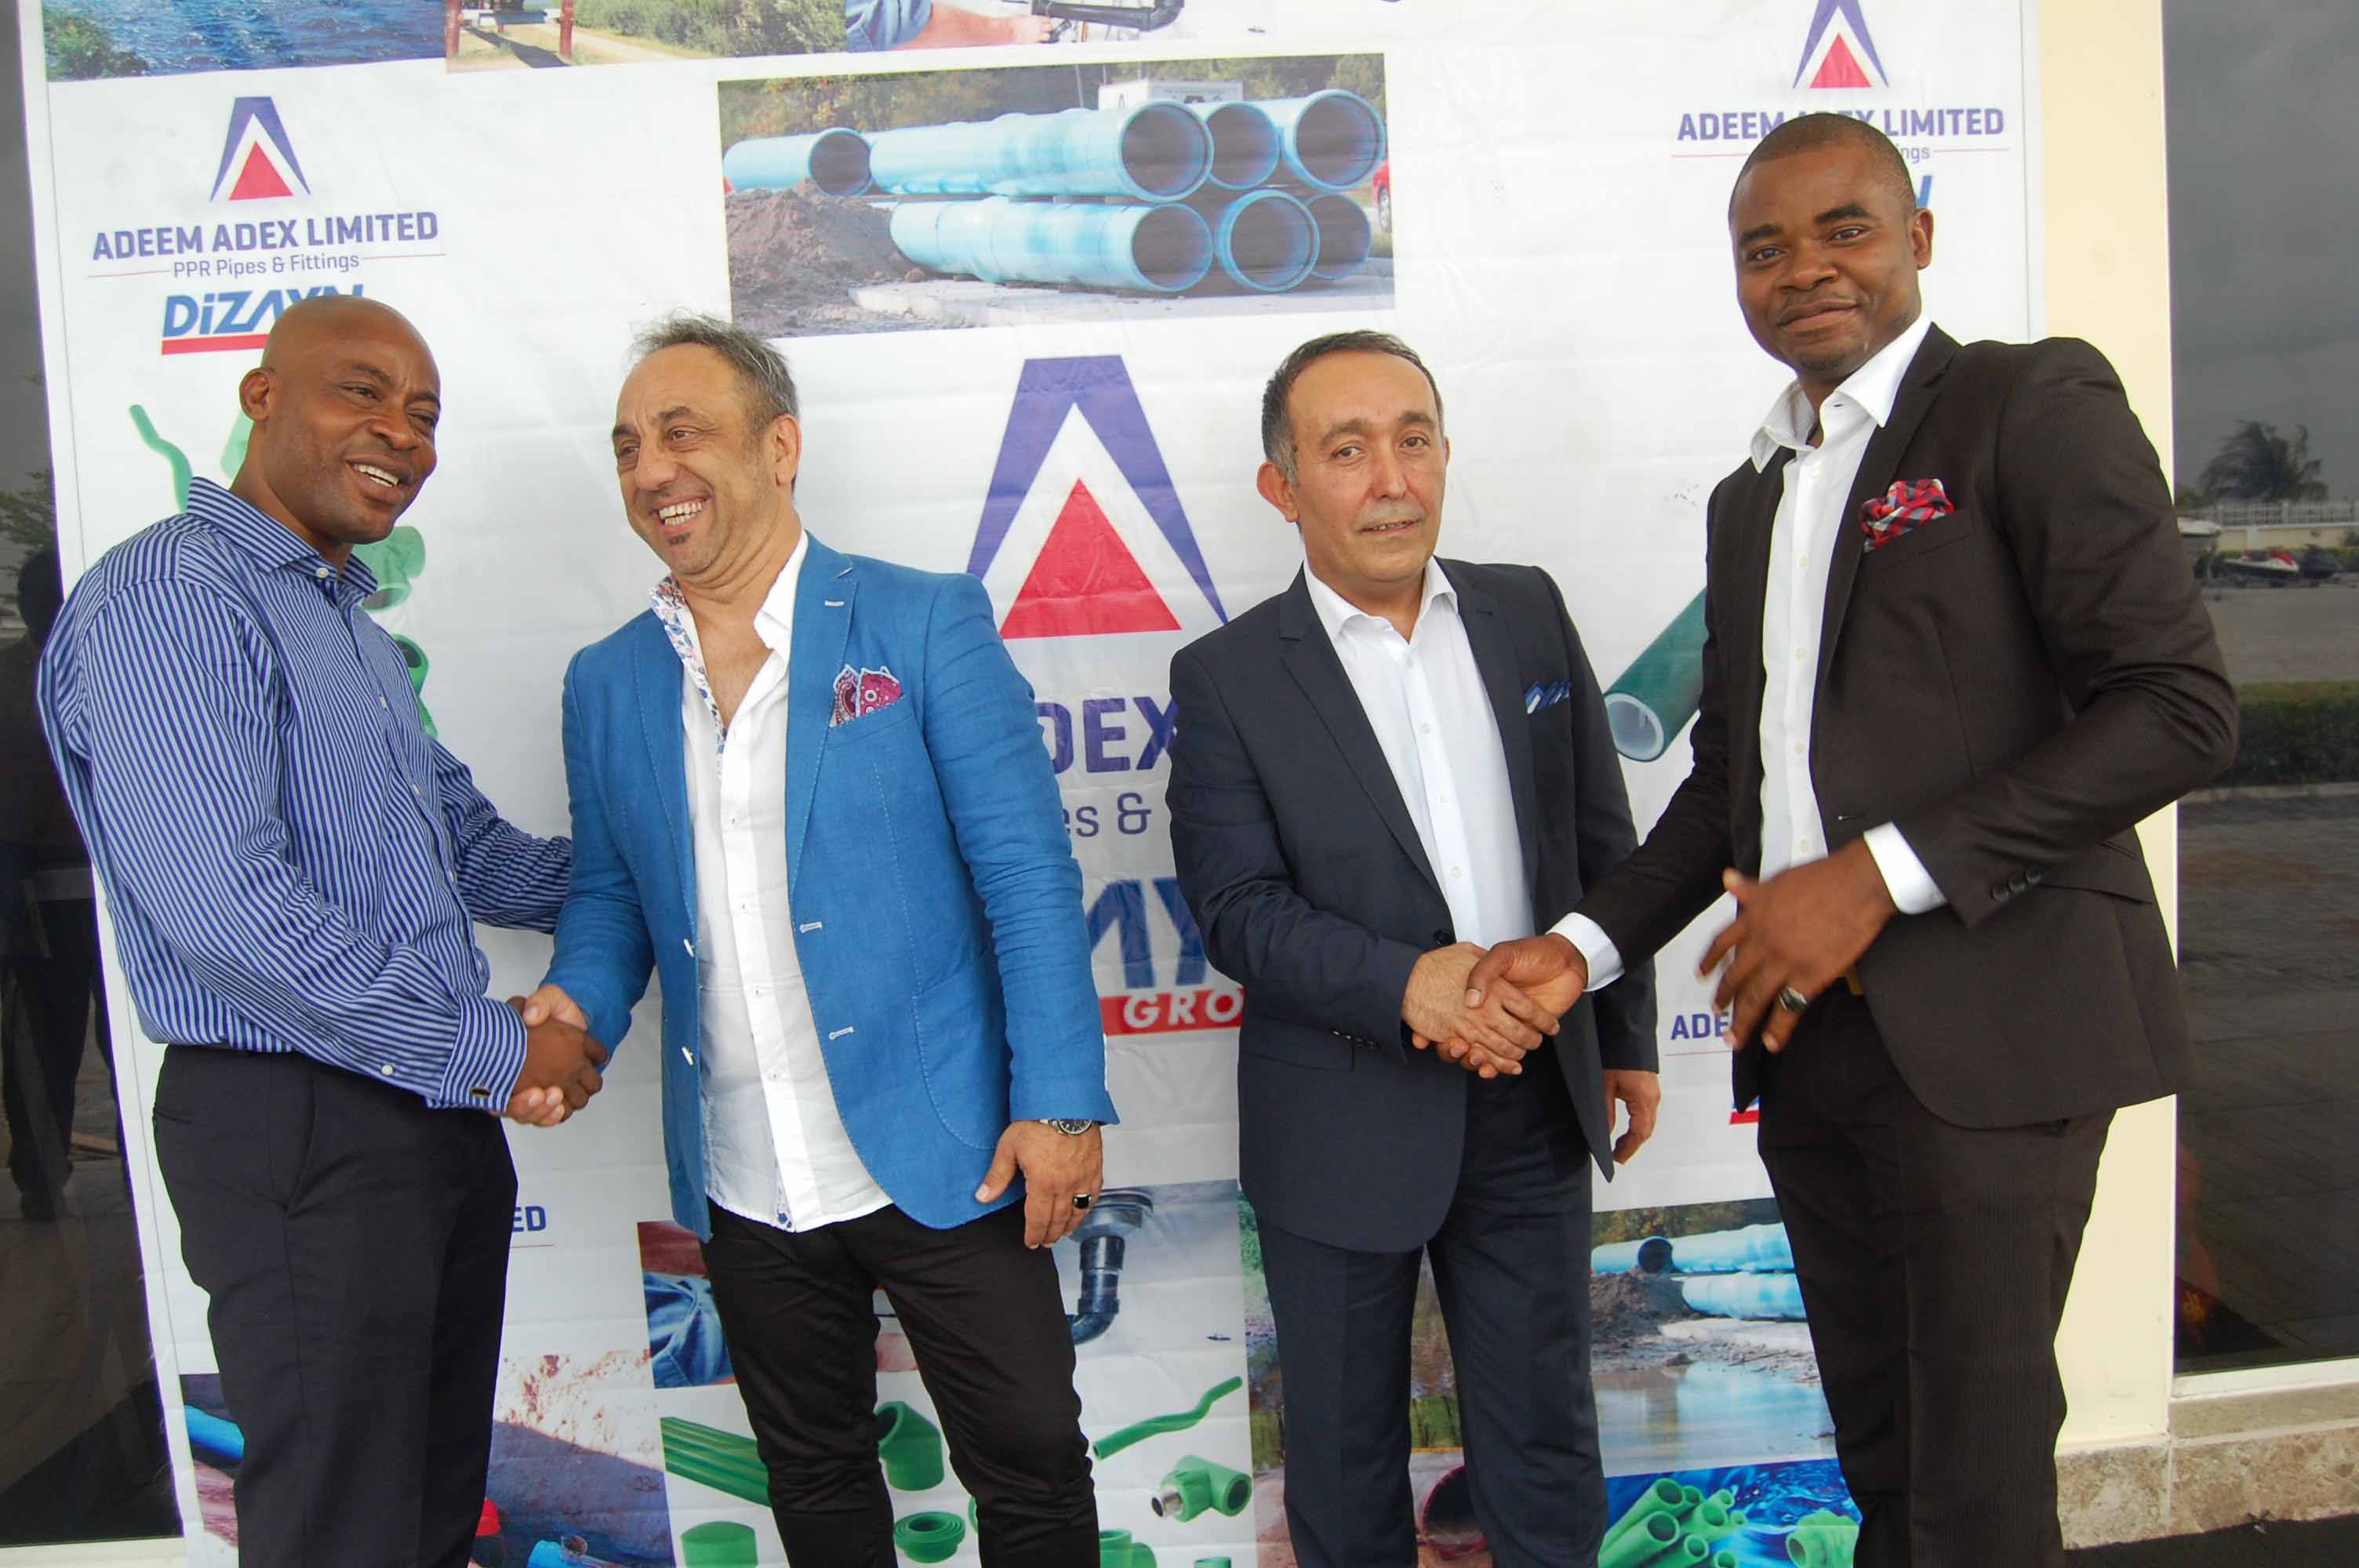 Adeem Adex, Dizayn Group Introduce Latest Pipe Products Into Nigeria’s Market-marketingspace.com.ng